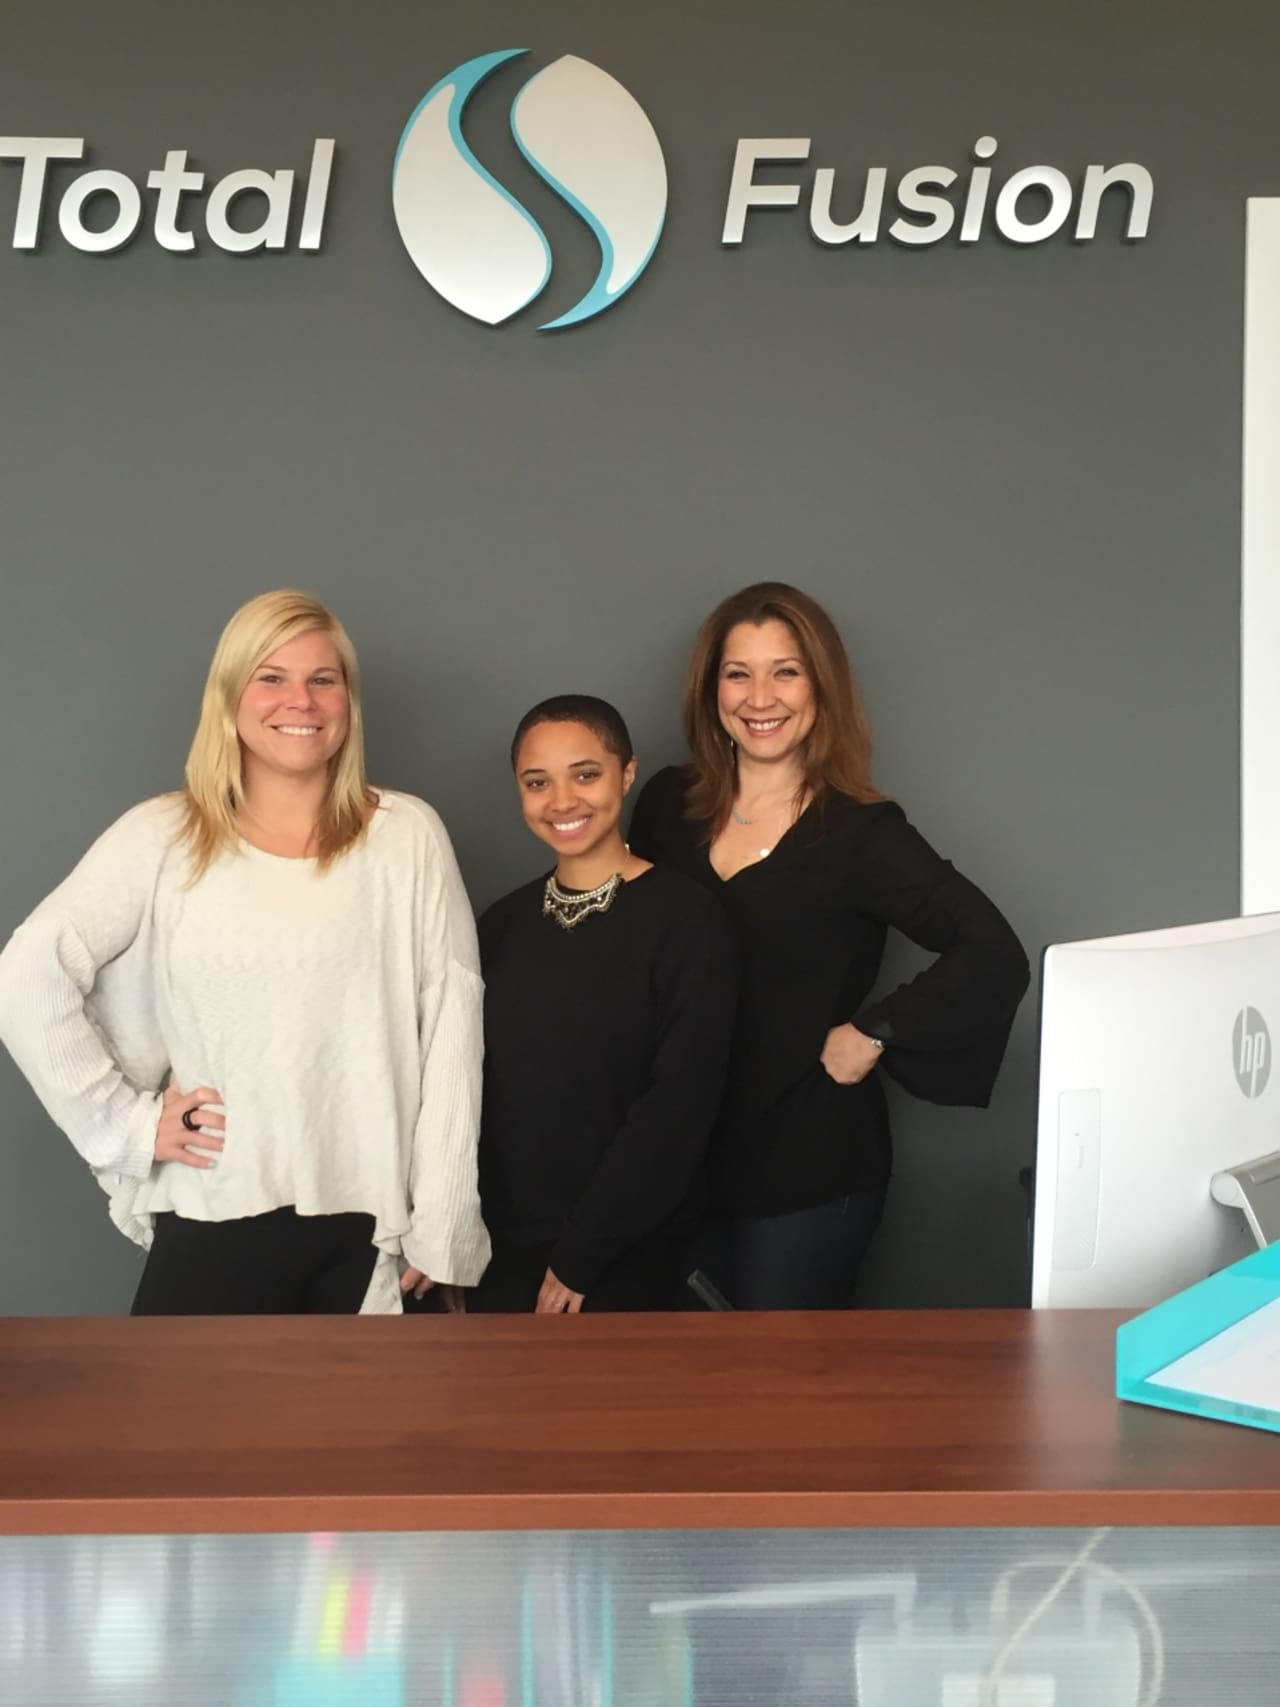 Some of the staff at the new TotalFusion in Harrison; left to right, Megan Carron, Stephanie Jiminez, and Toni DAmario (Fiore).